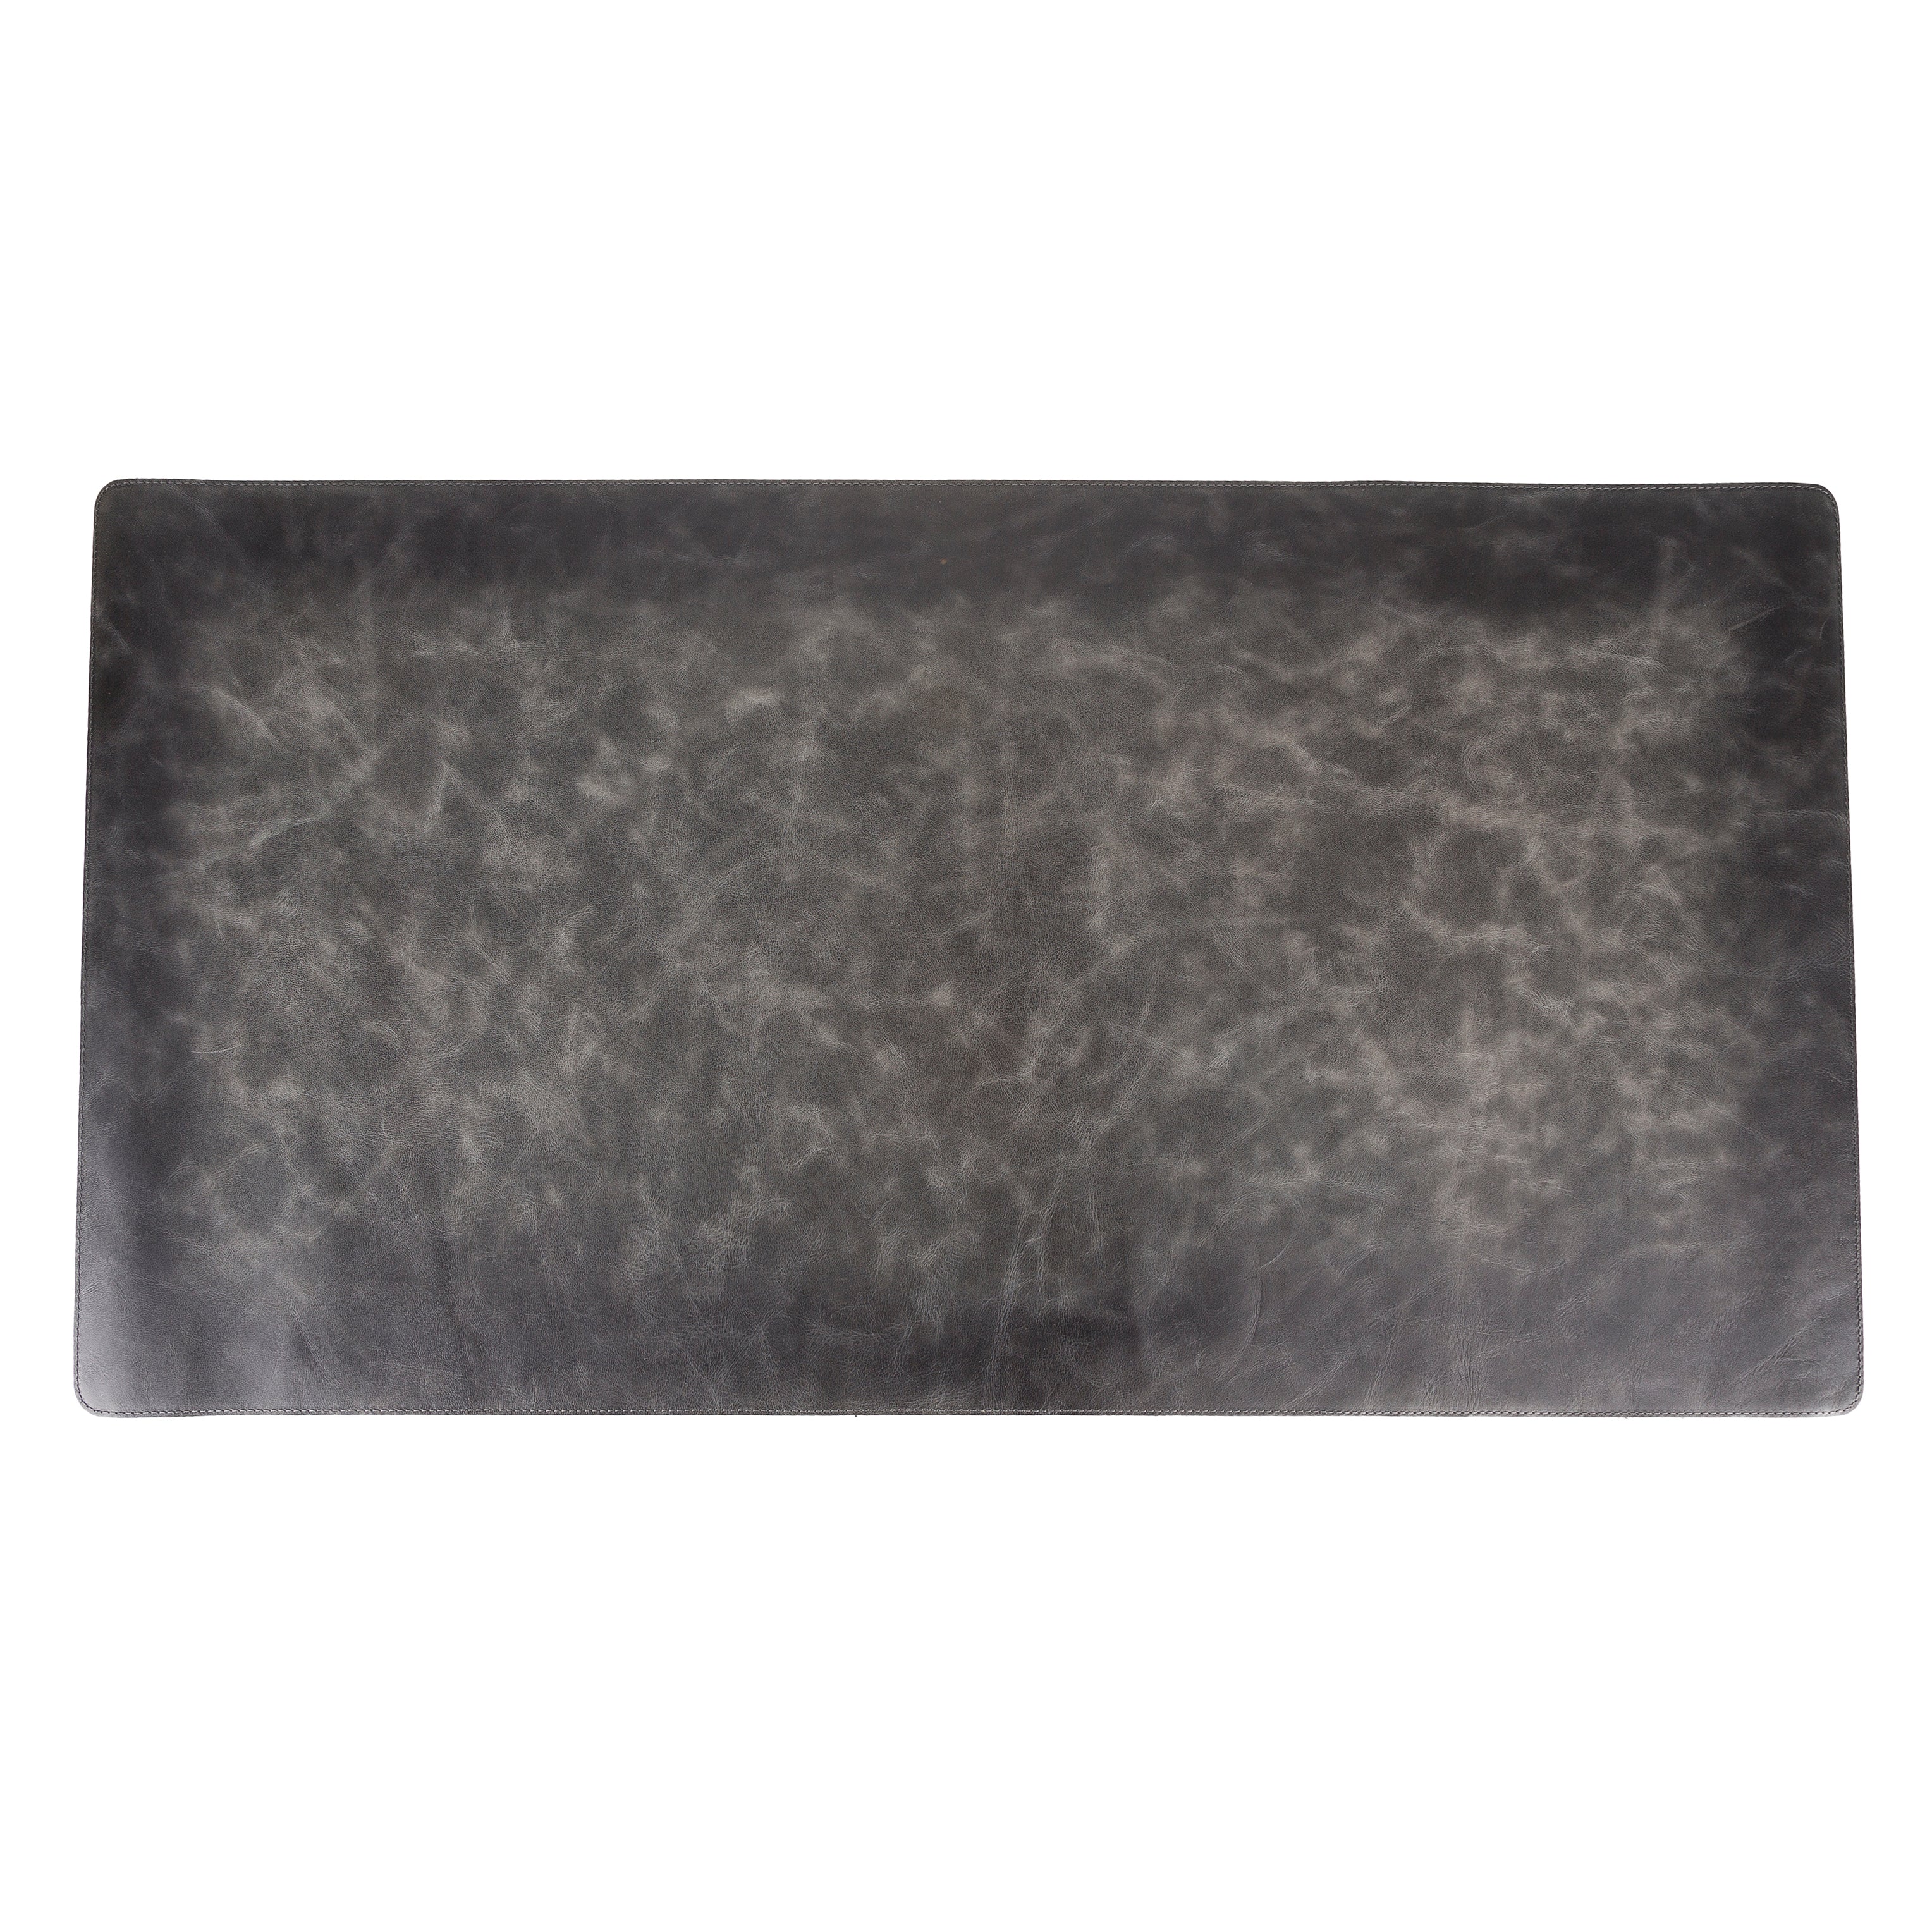 LupinnyLeather Genuine Grey Leather Deskmat, Computer Pad, Office Desk Pad 4